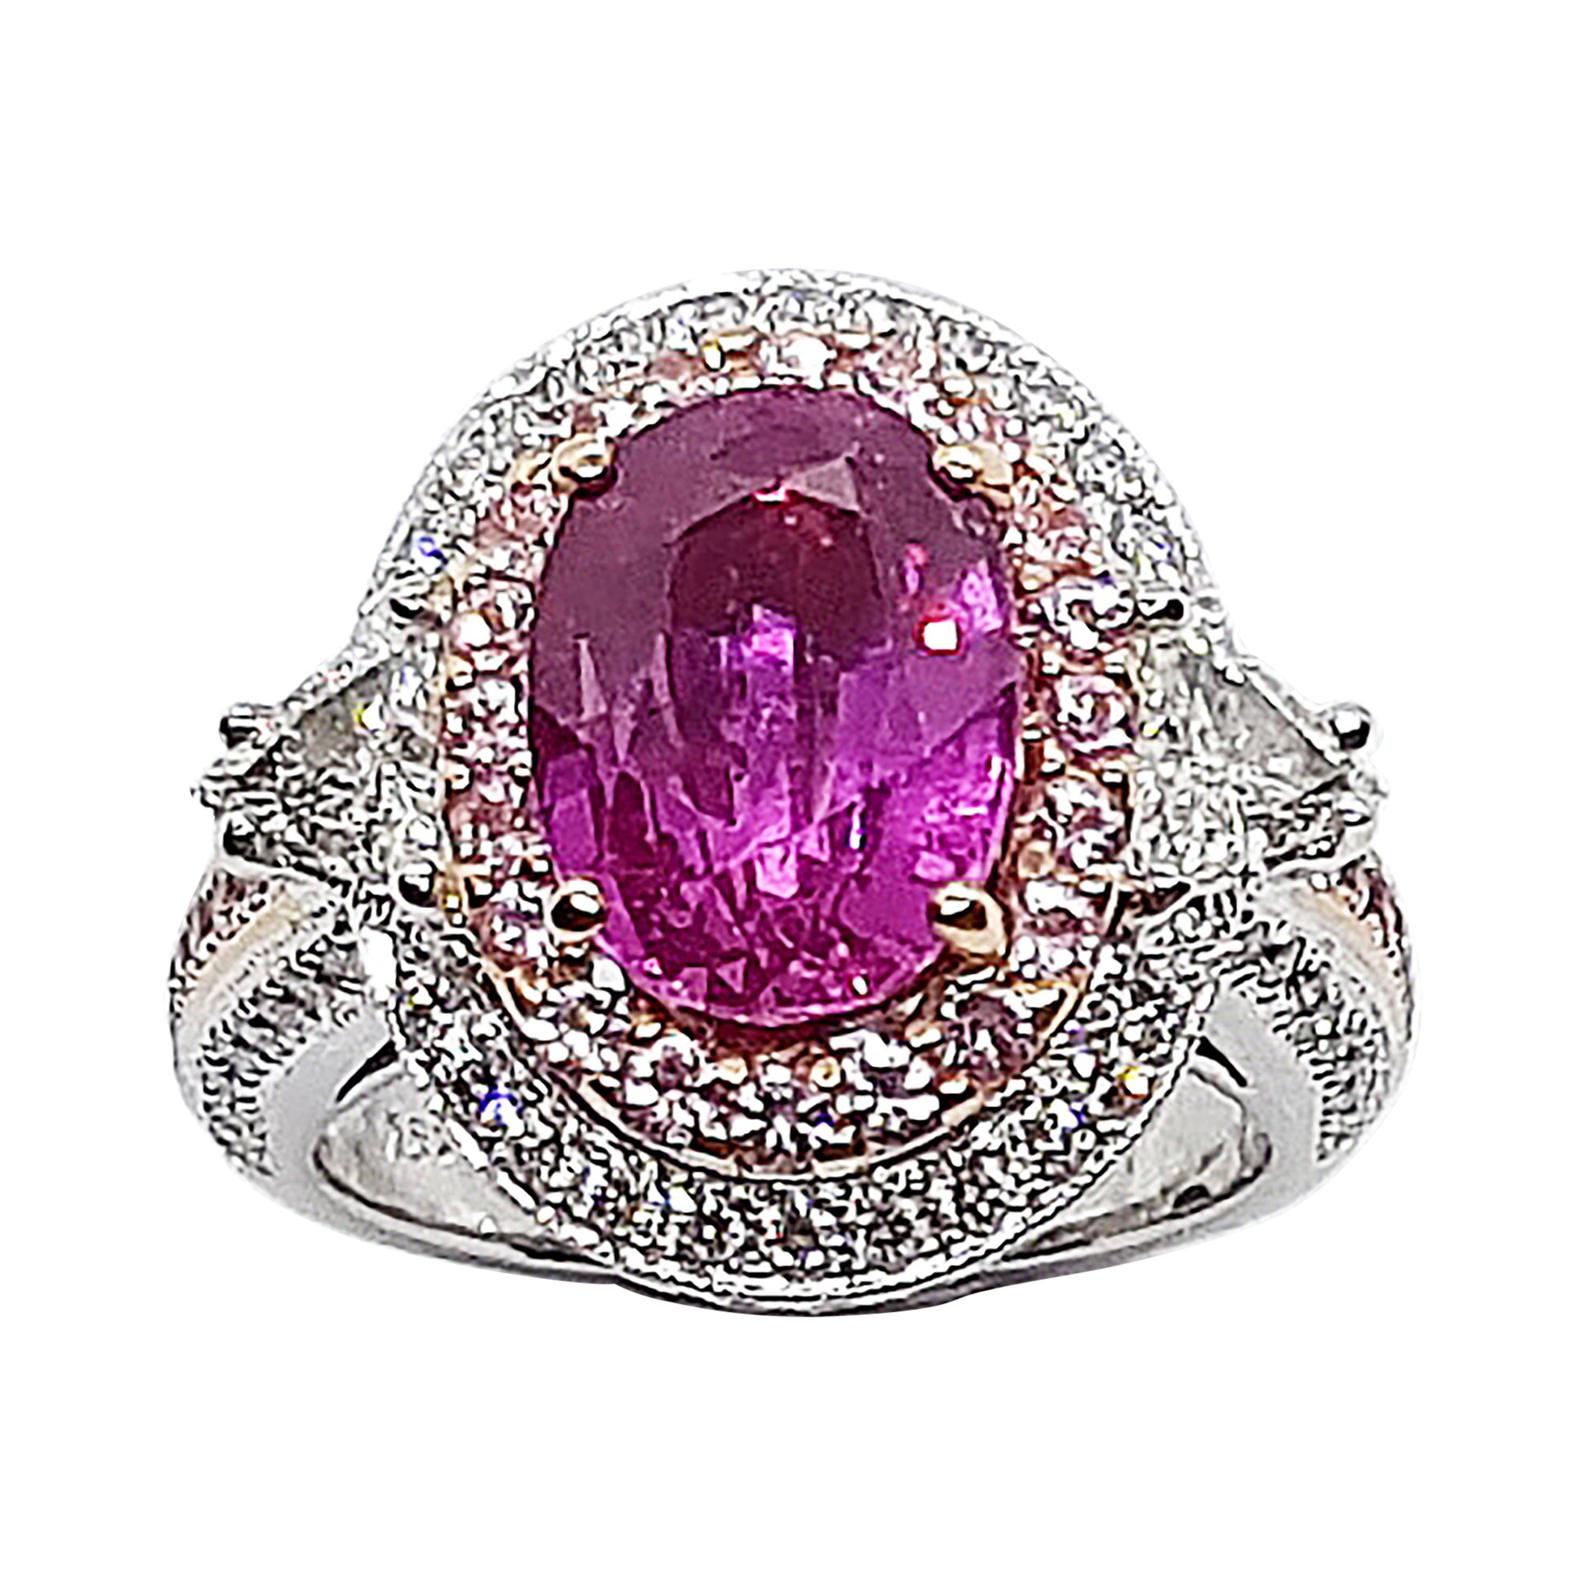 GIA Certified Unheated 4 Cts Pink Sapphire with Diamond Ring in 18Kt White Gold